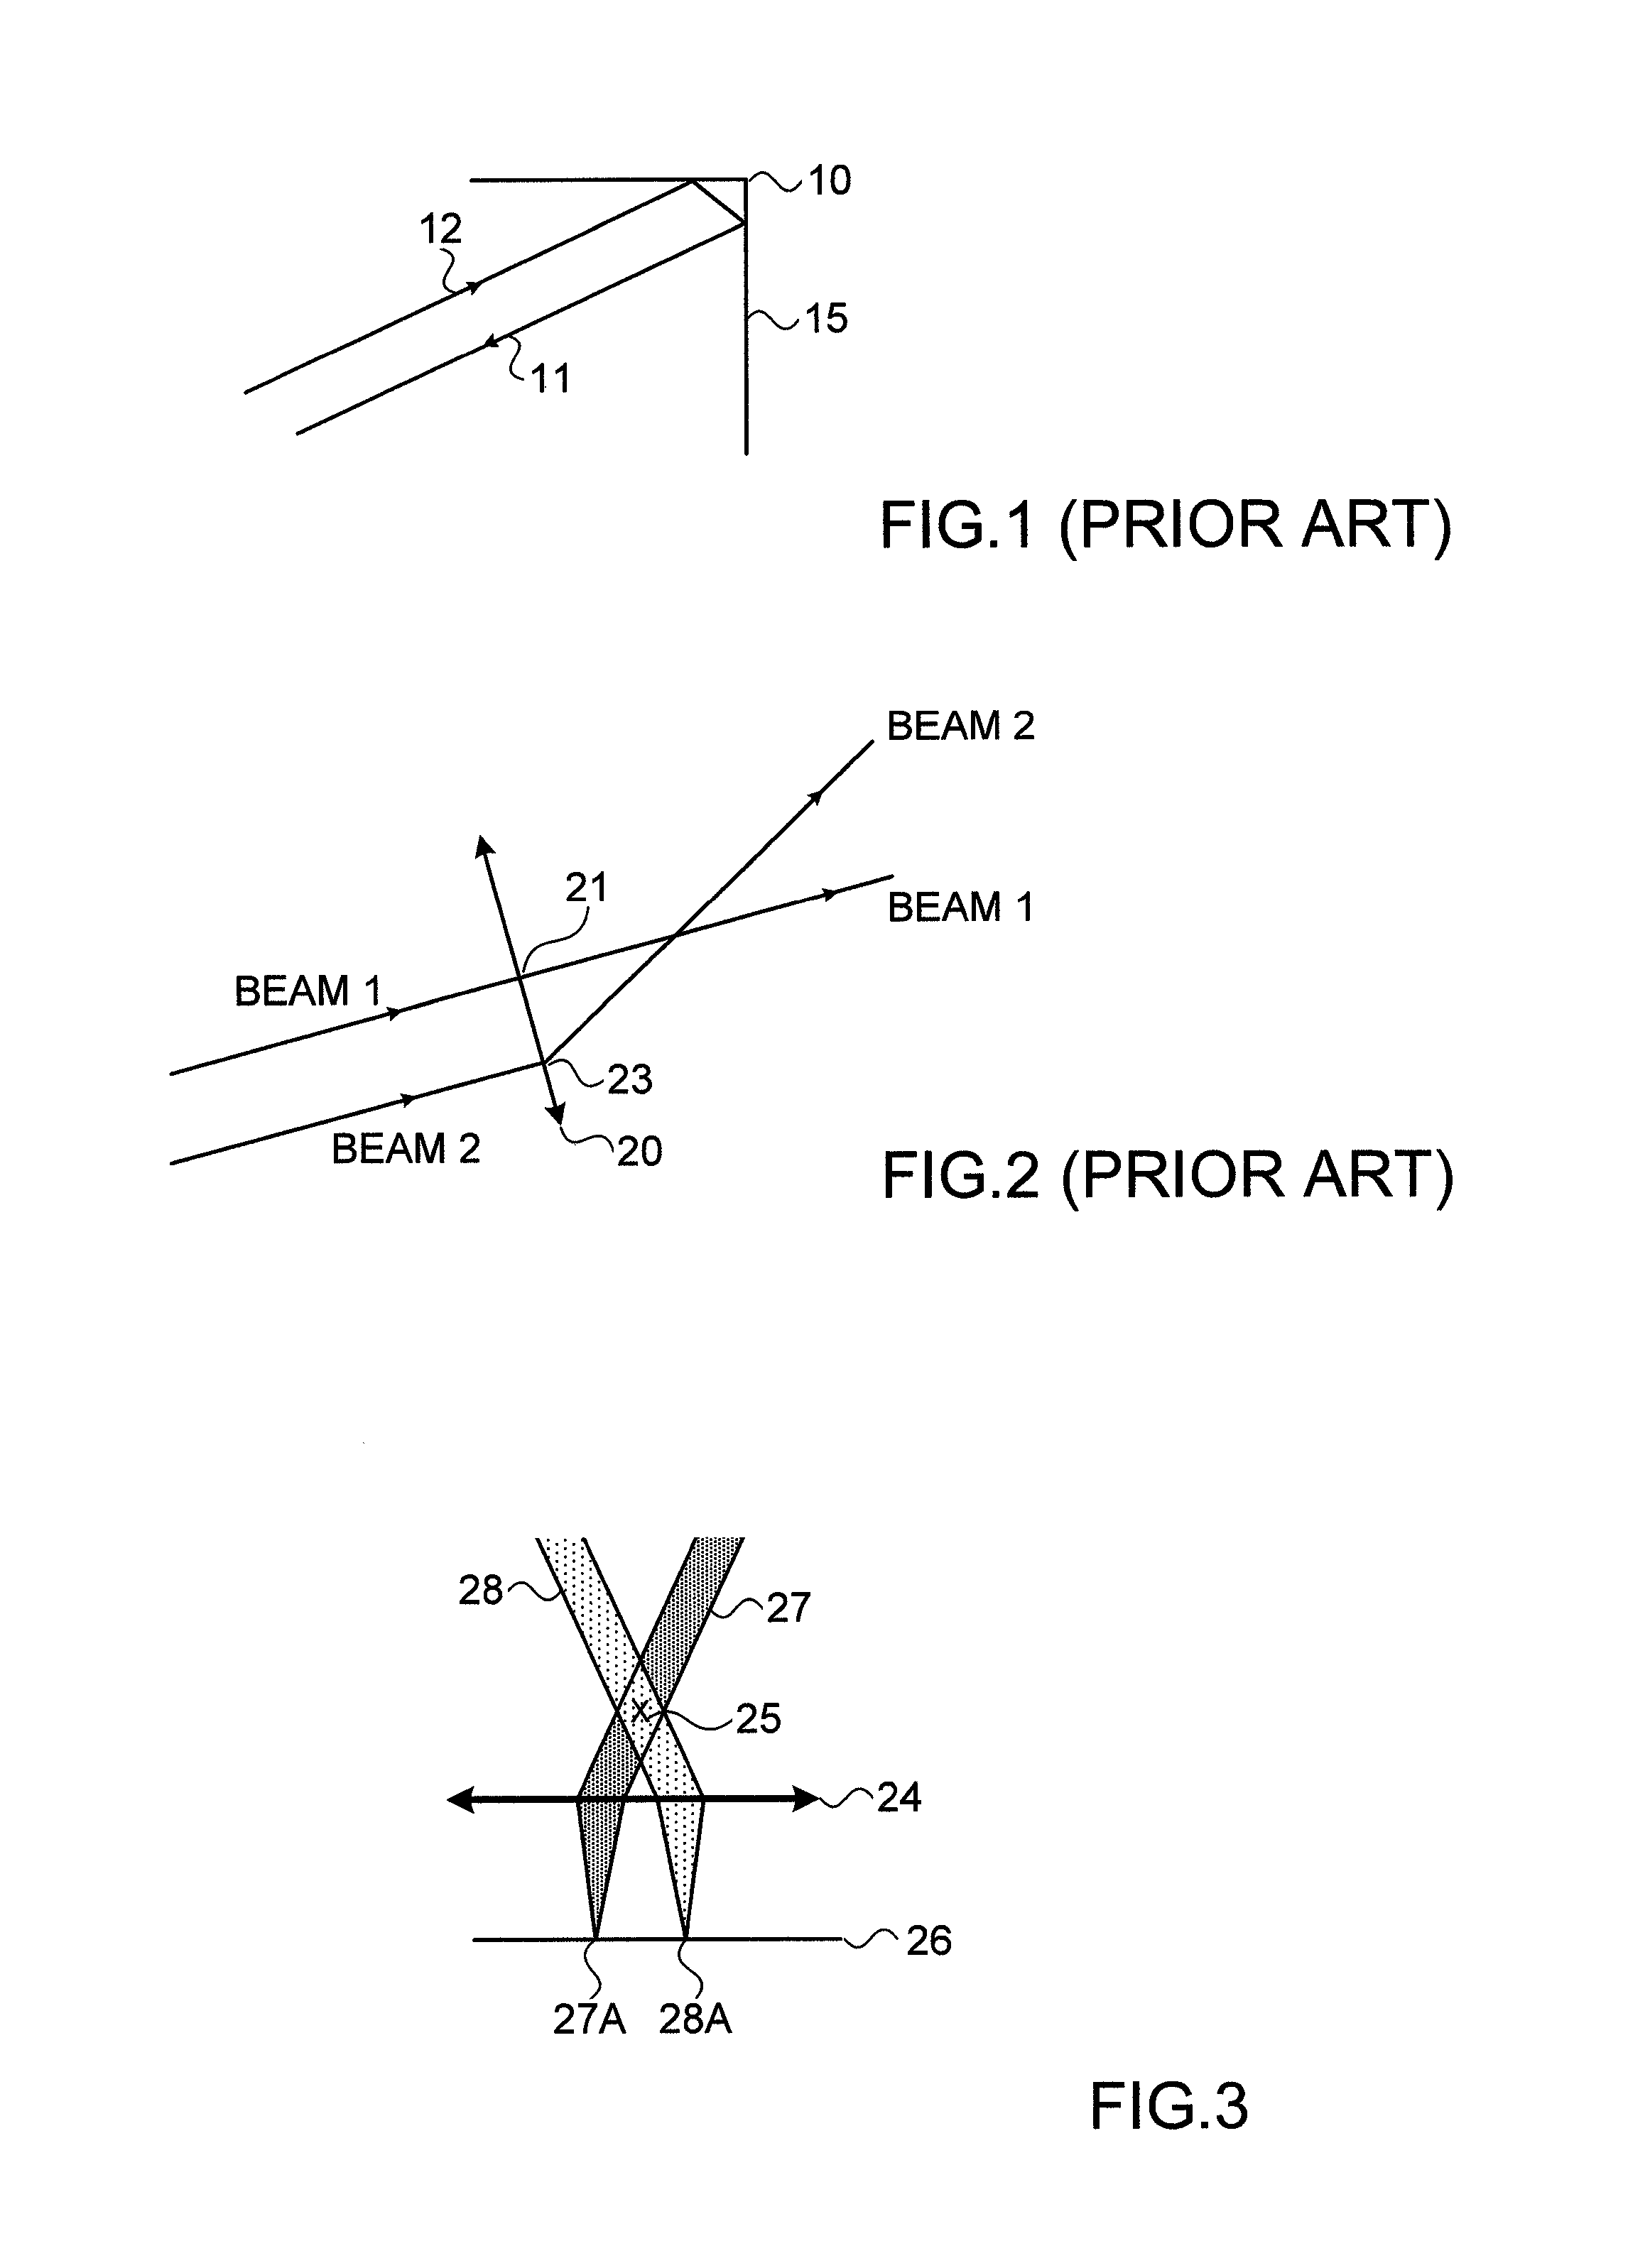 Spatially distributed laser resonator